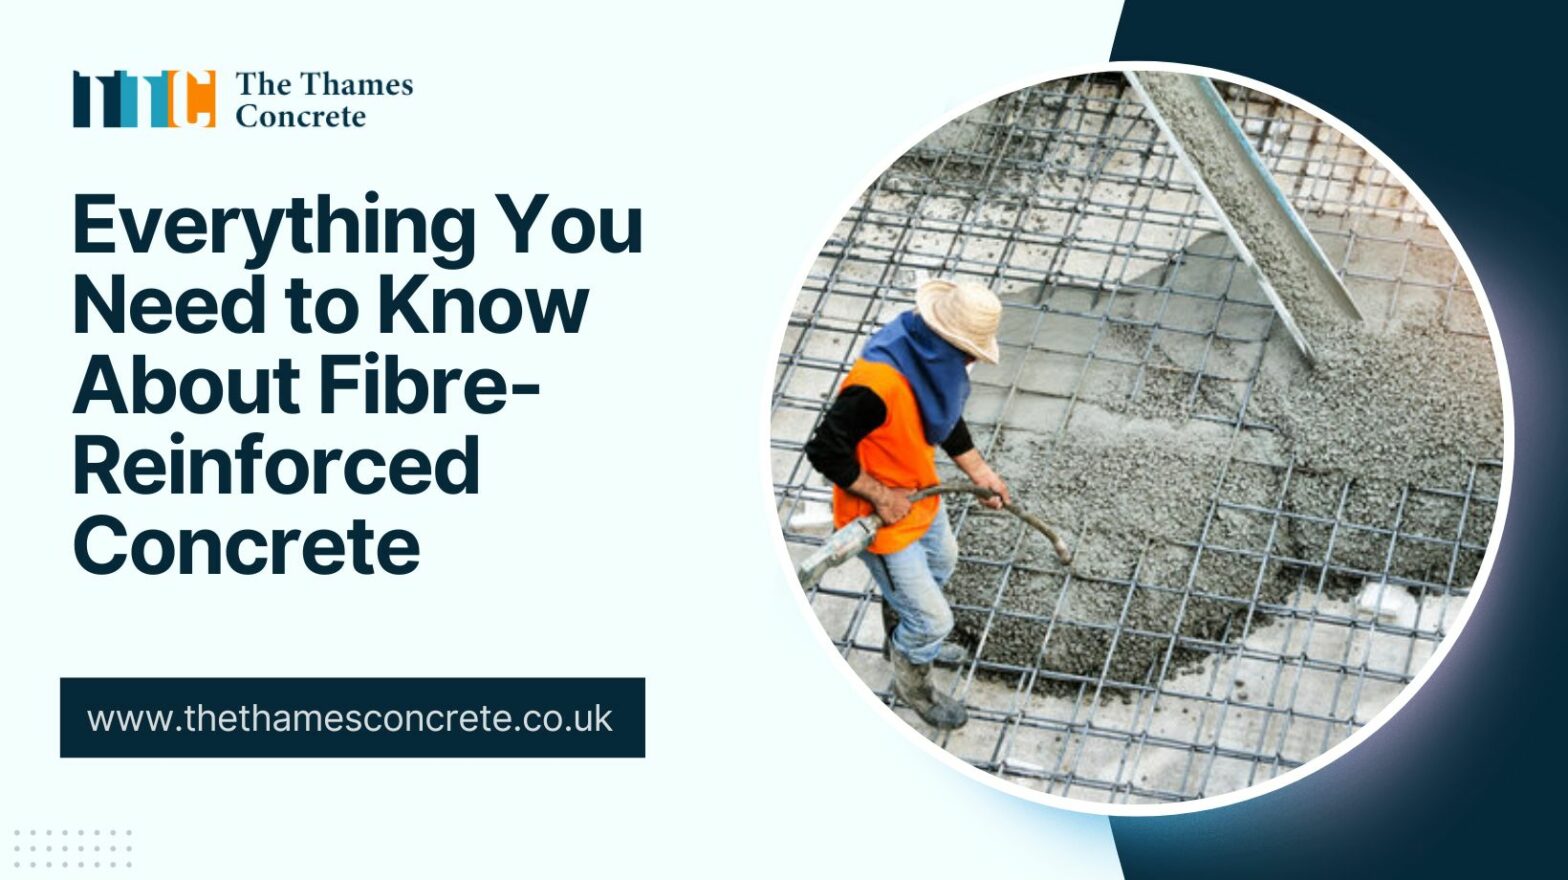 Everything You Need to Know About Fibre-Reinforced Concrete